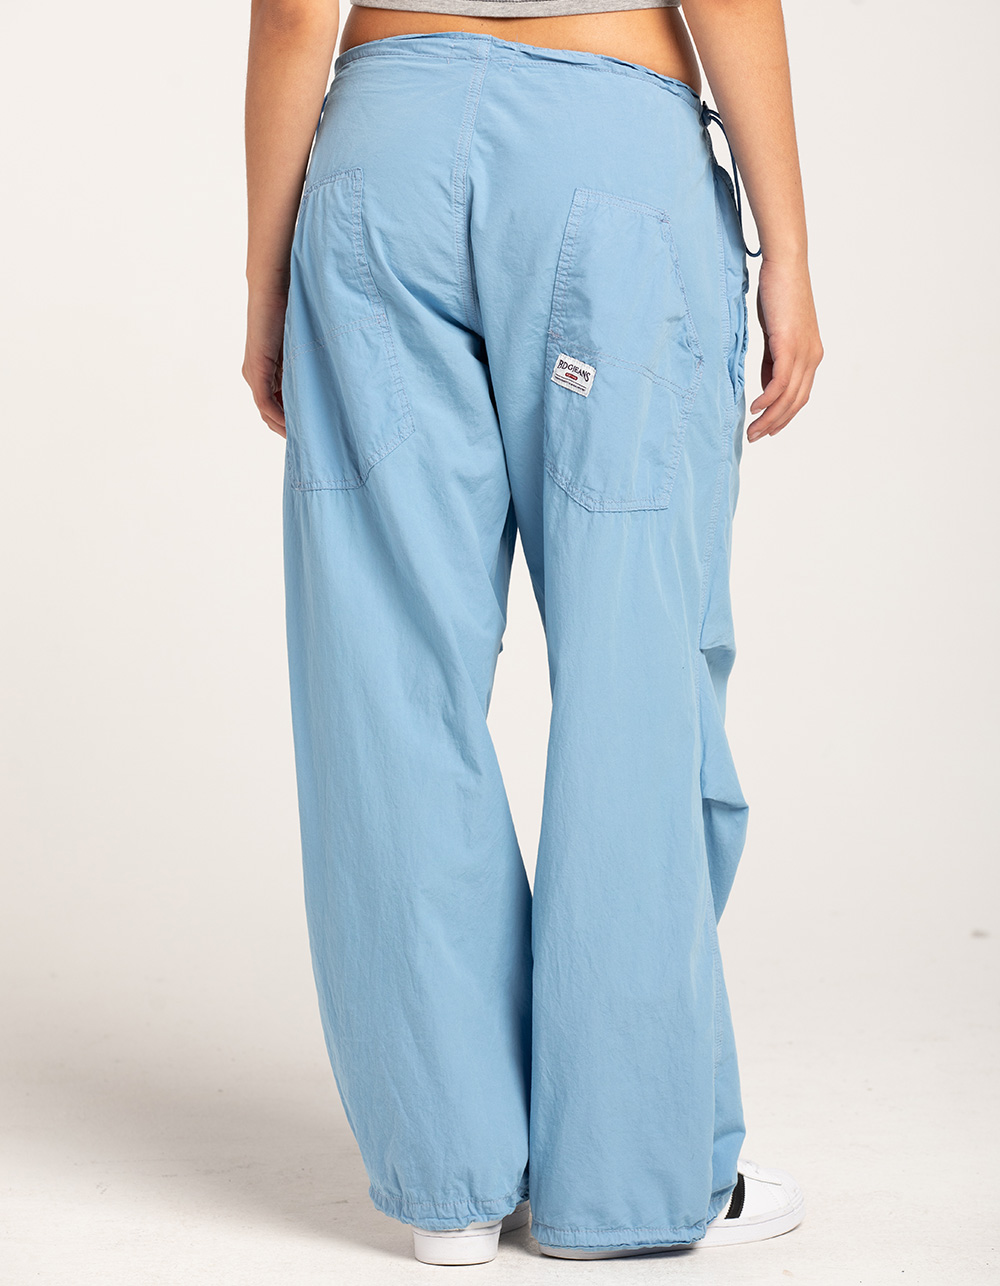 BDG Urban Outfitters Baggy Cargo Womens Pants